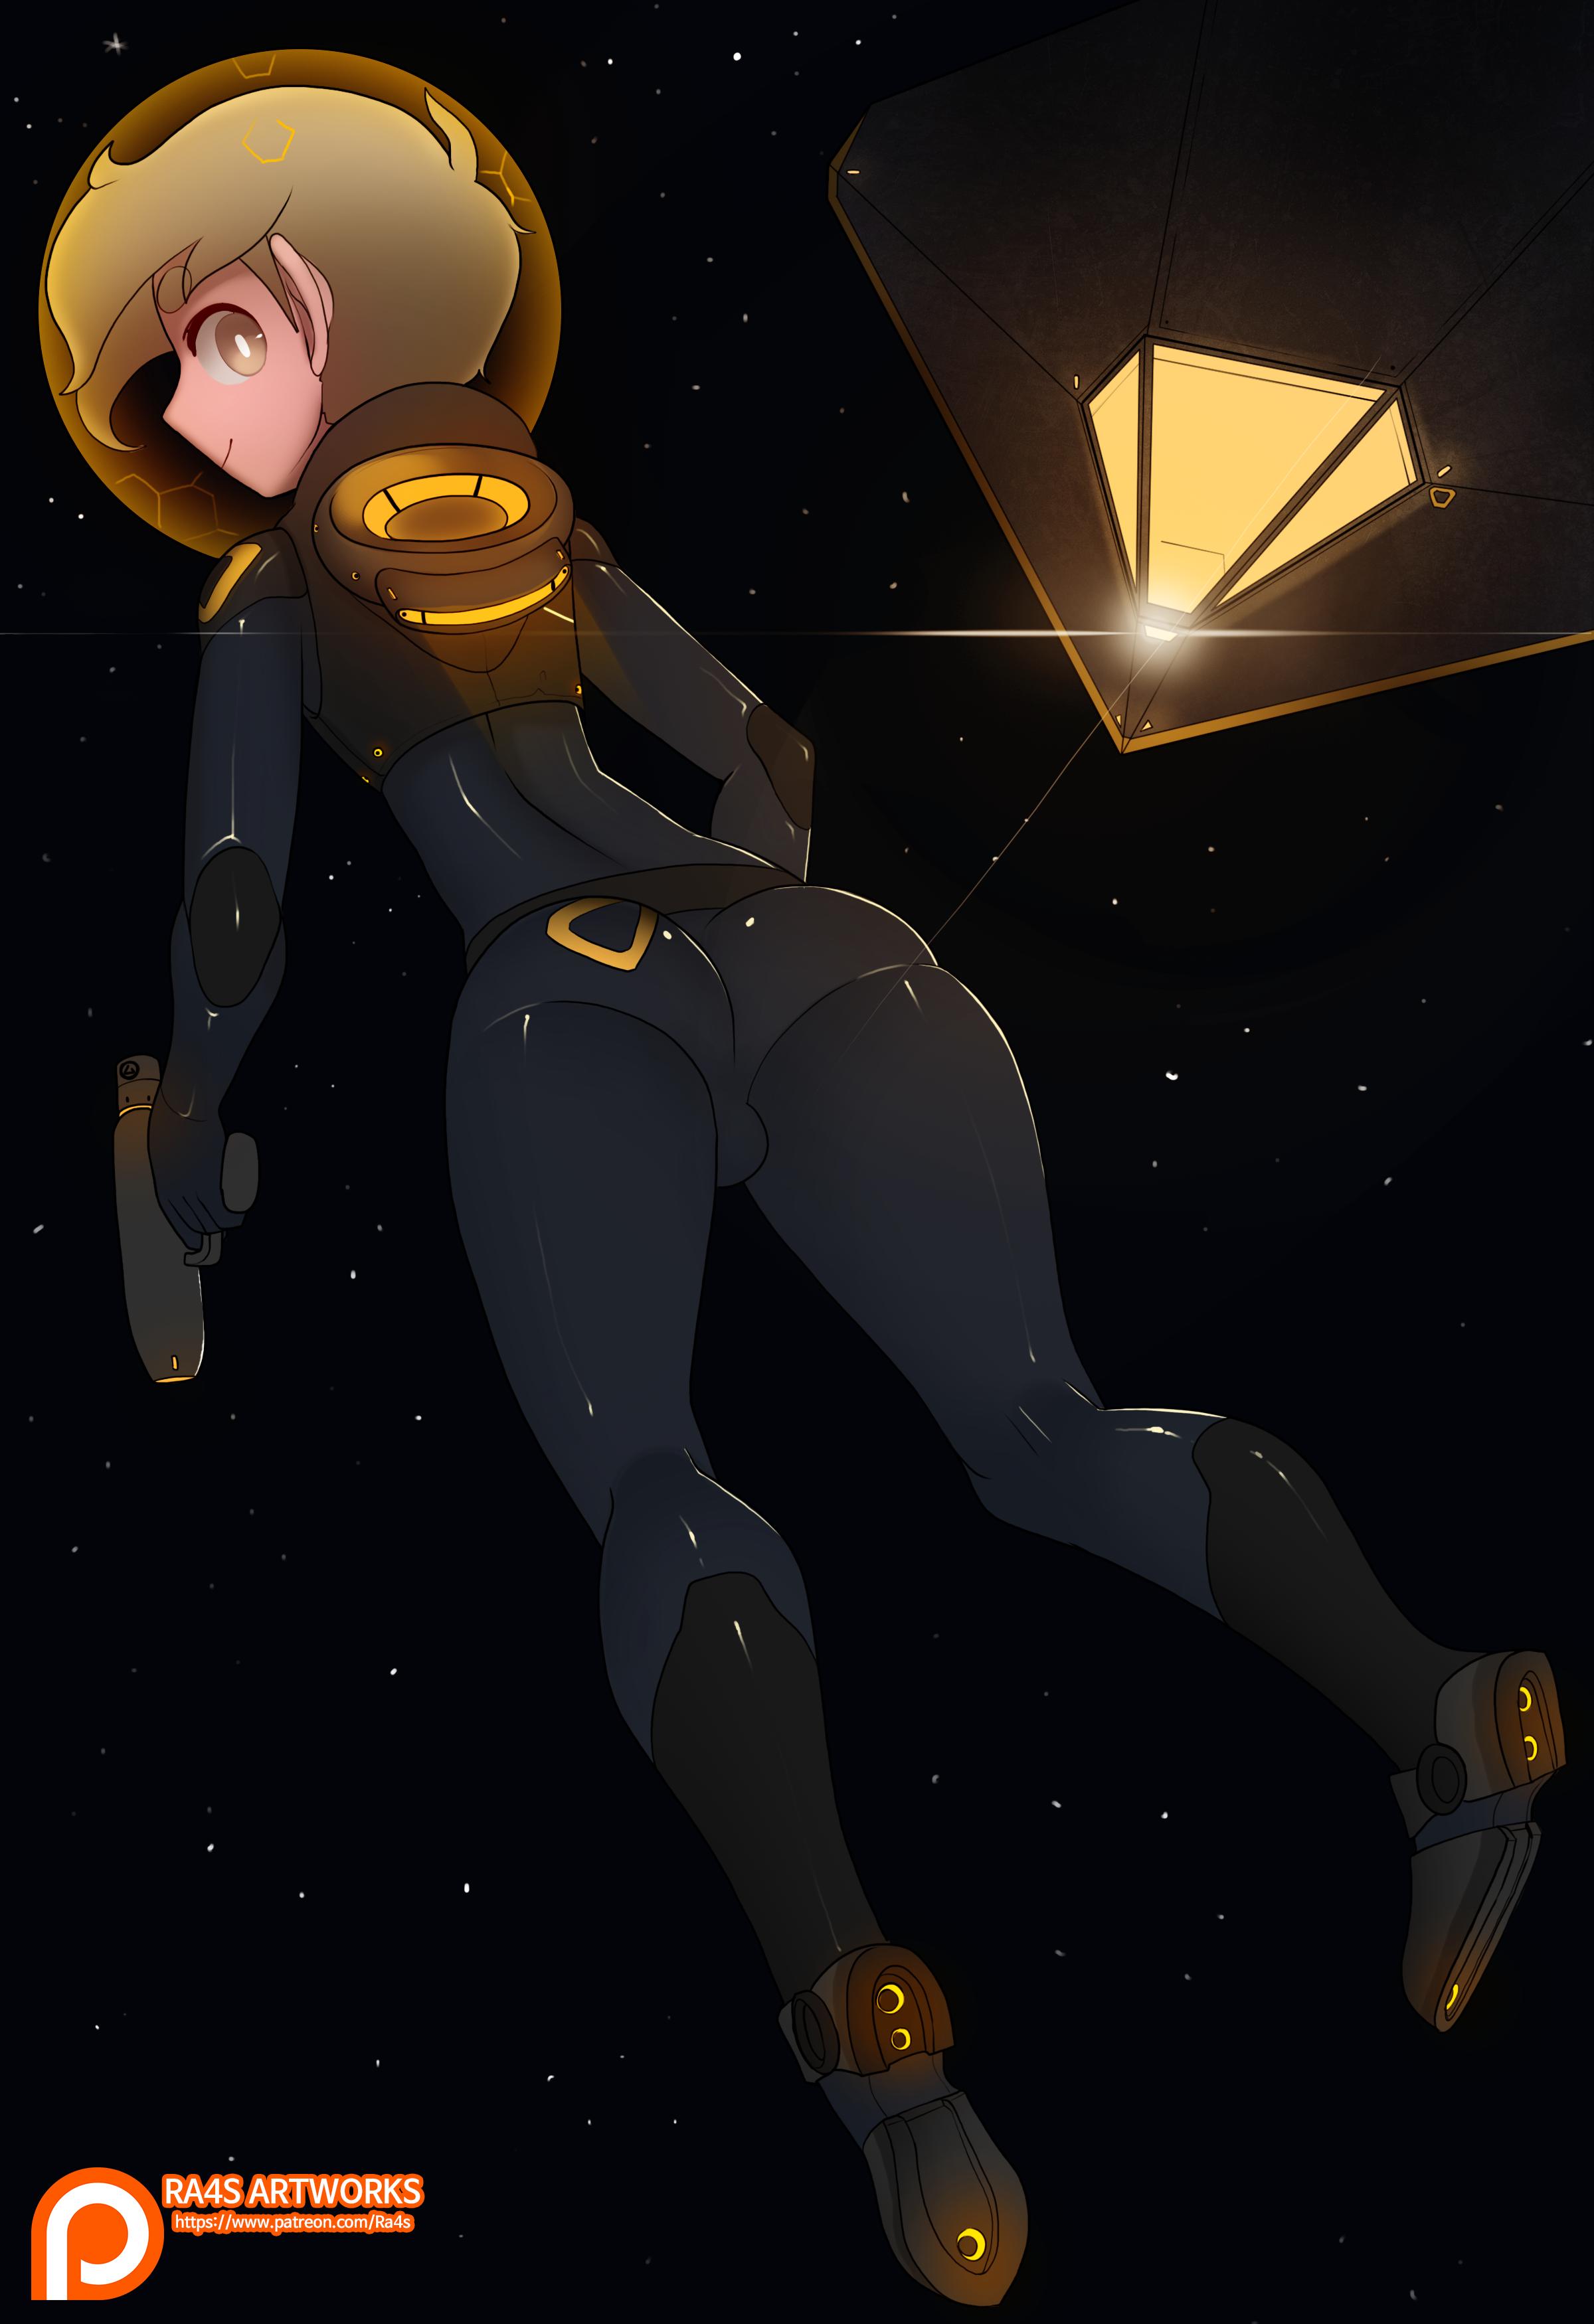 Rio in Spacesuit.png 